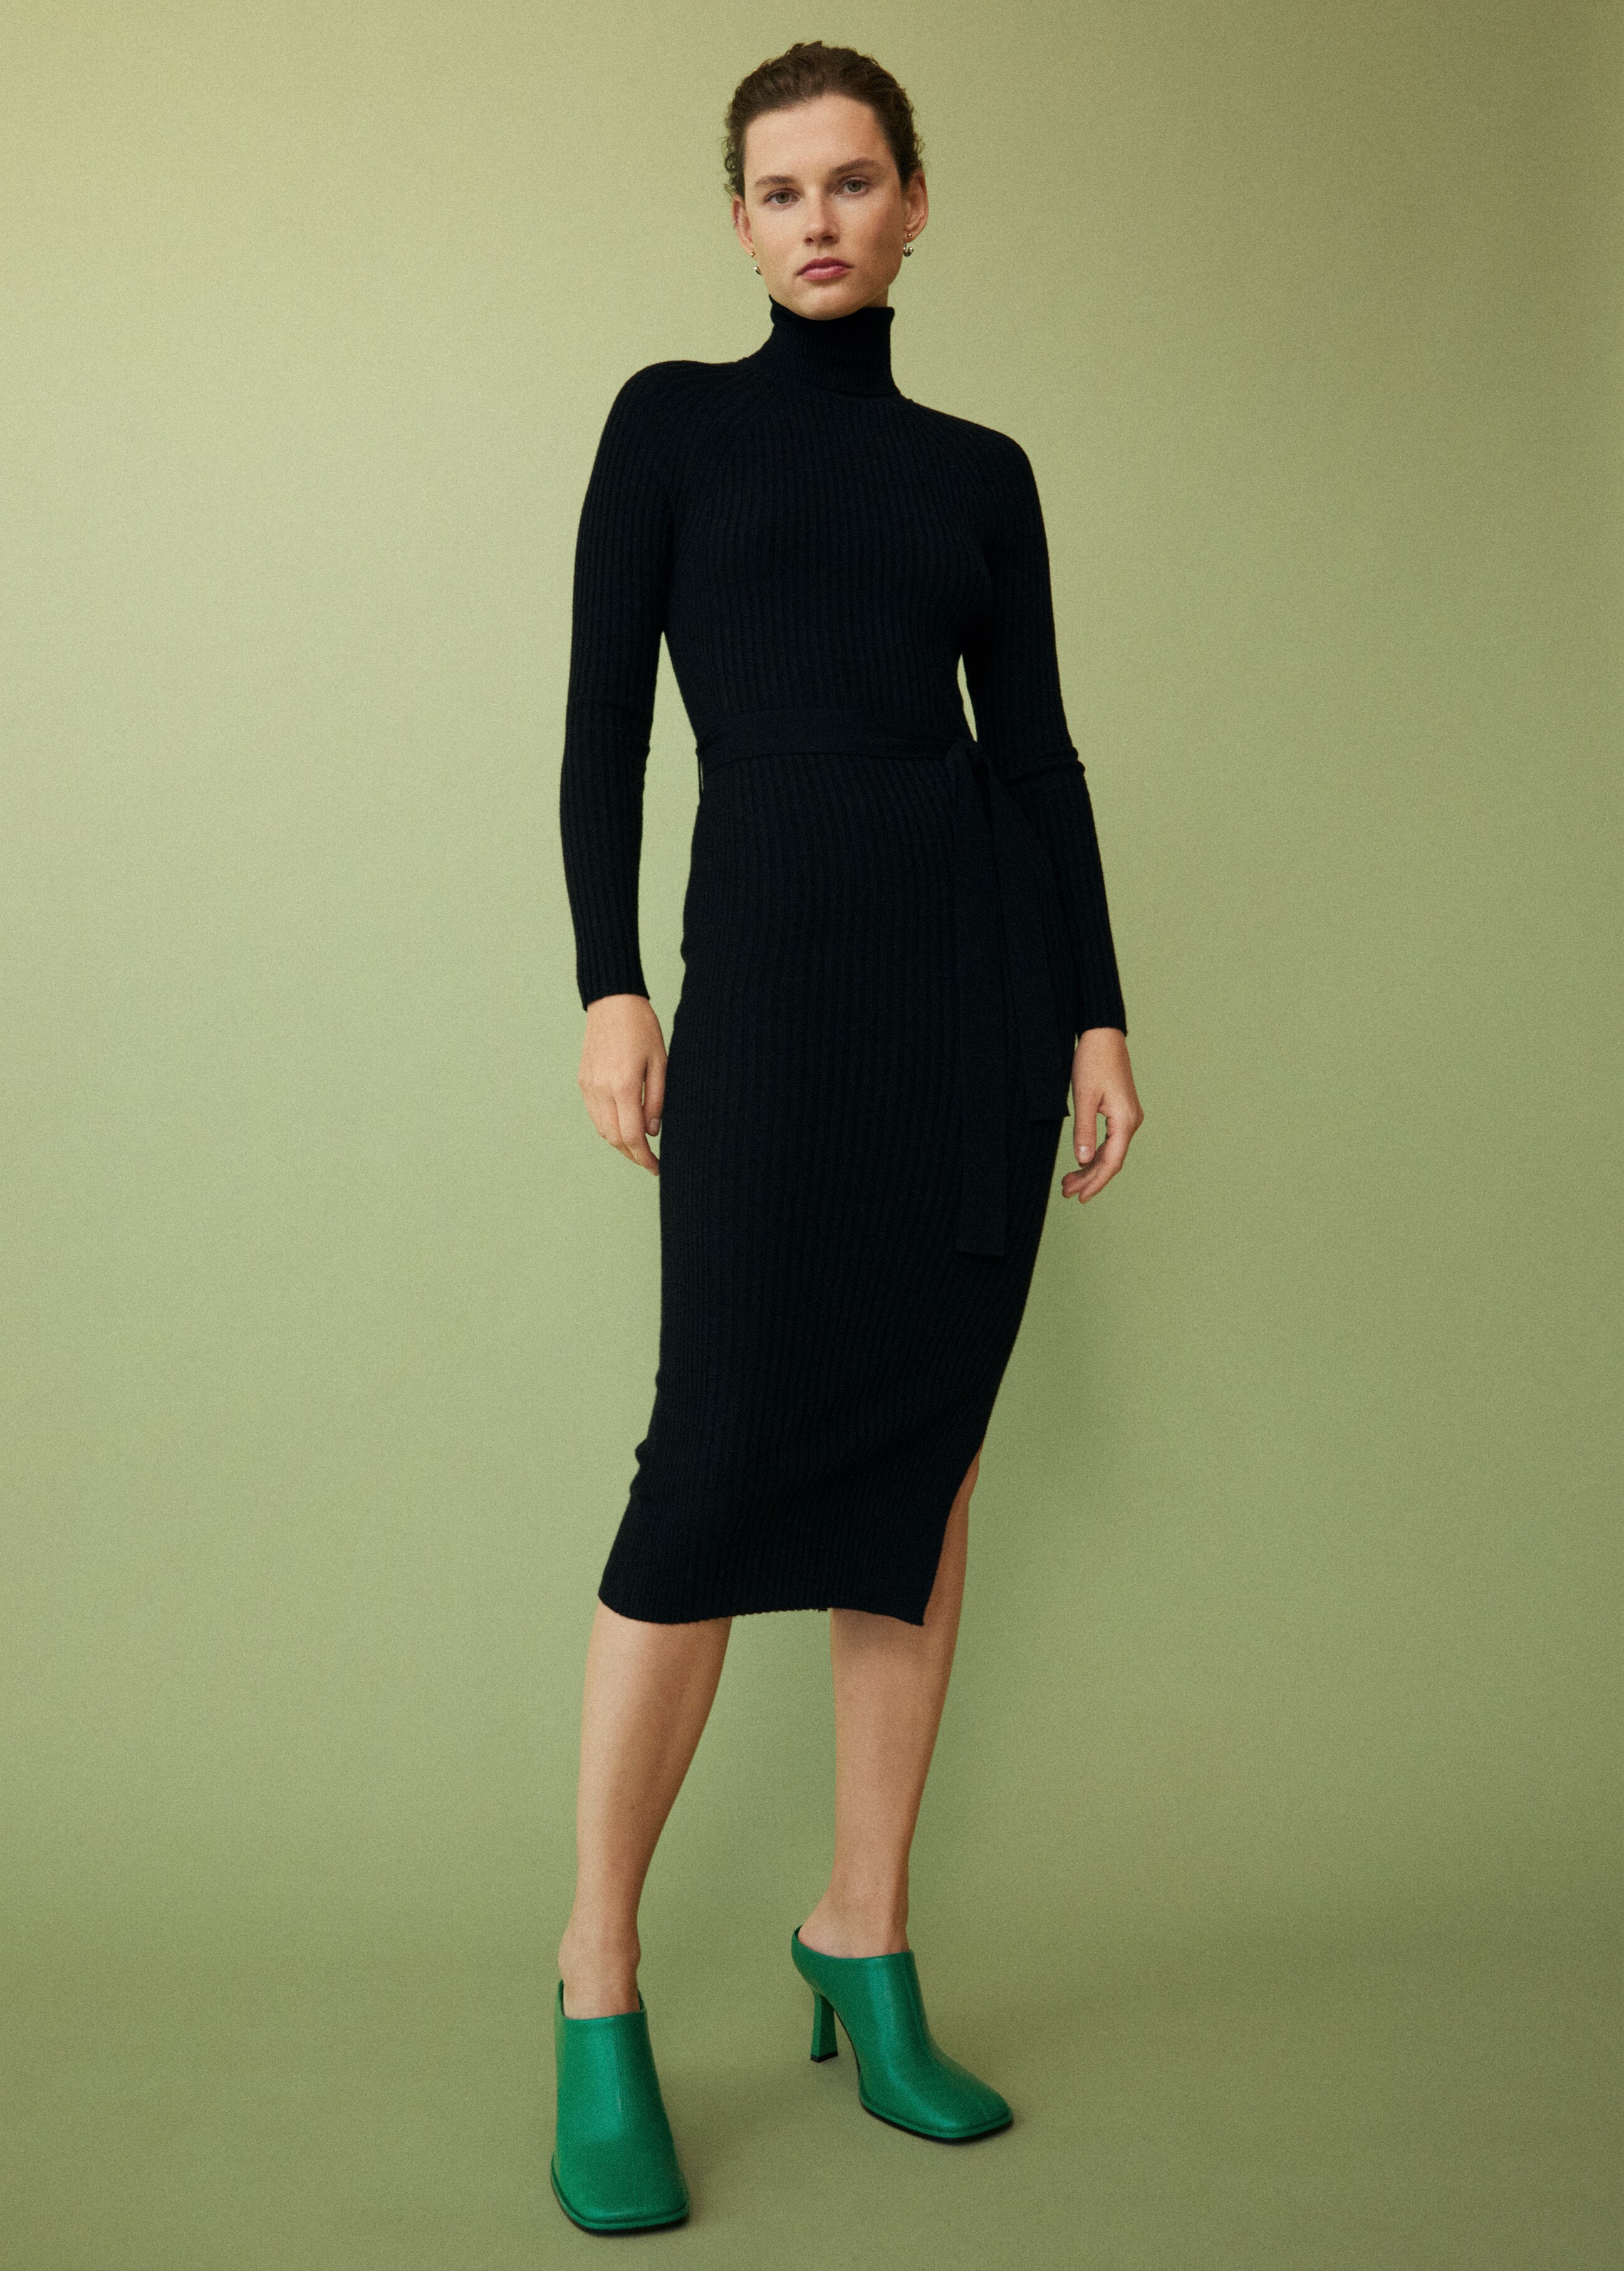 Knitted turtleneck dress - Details of the article 7